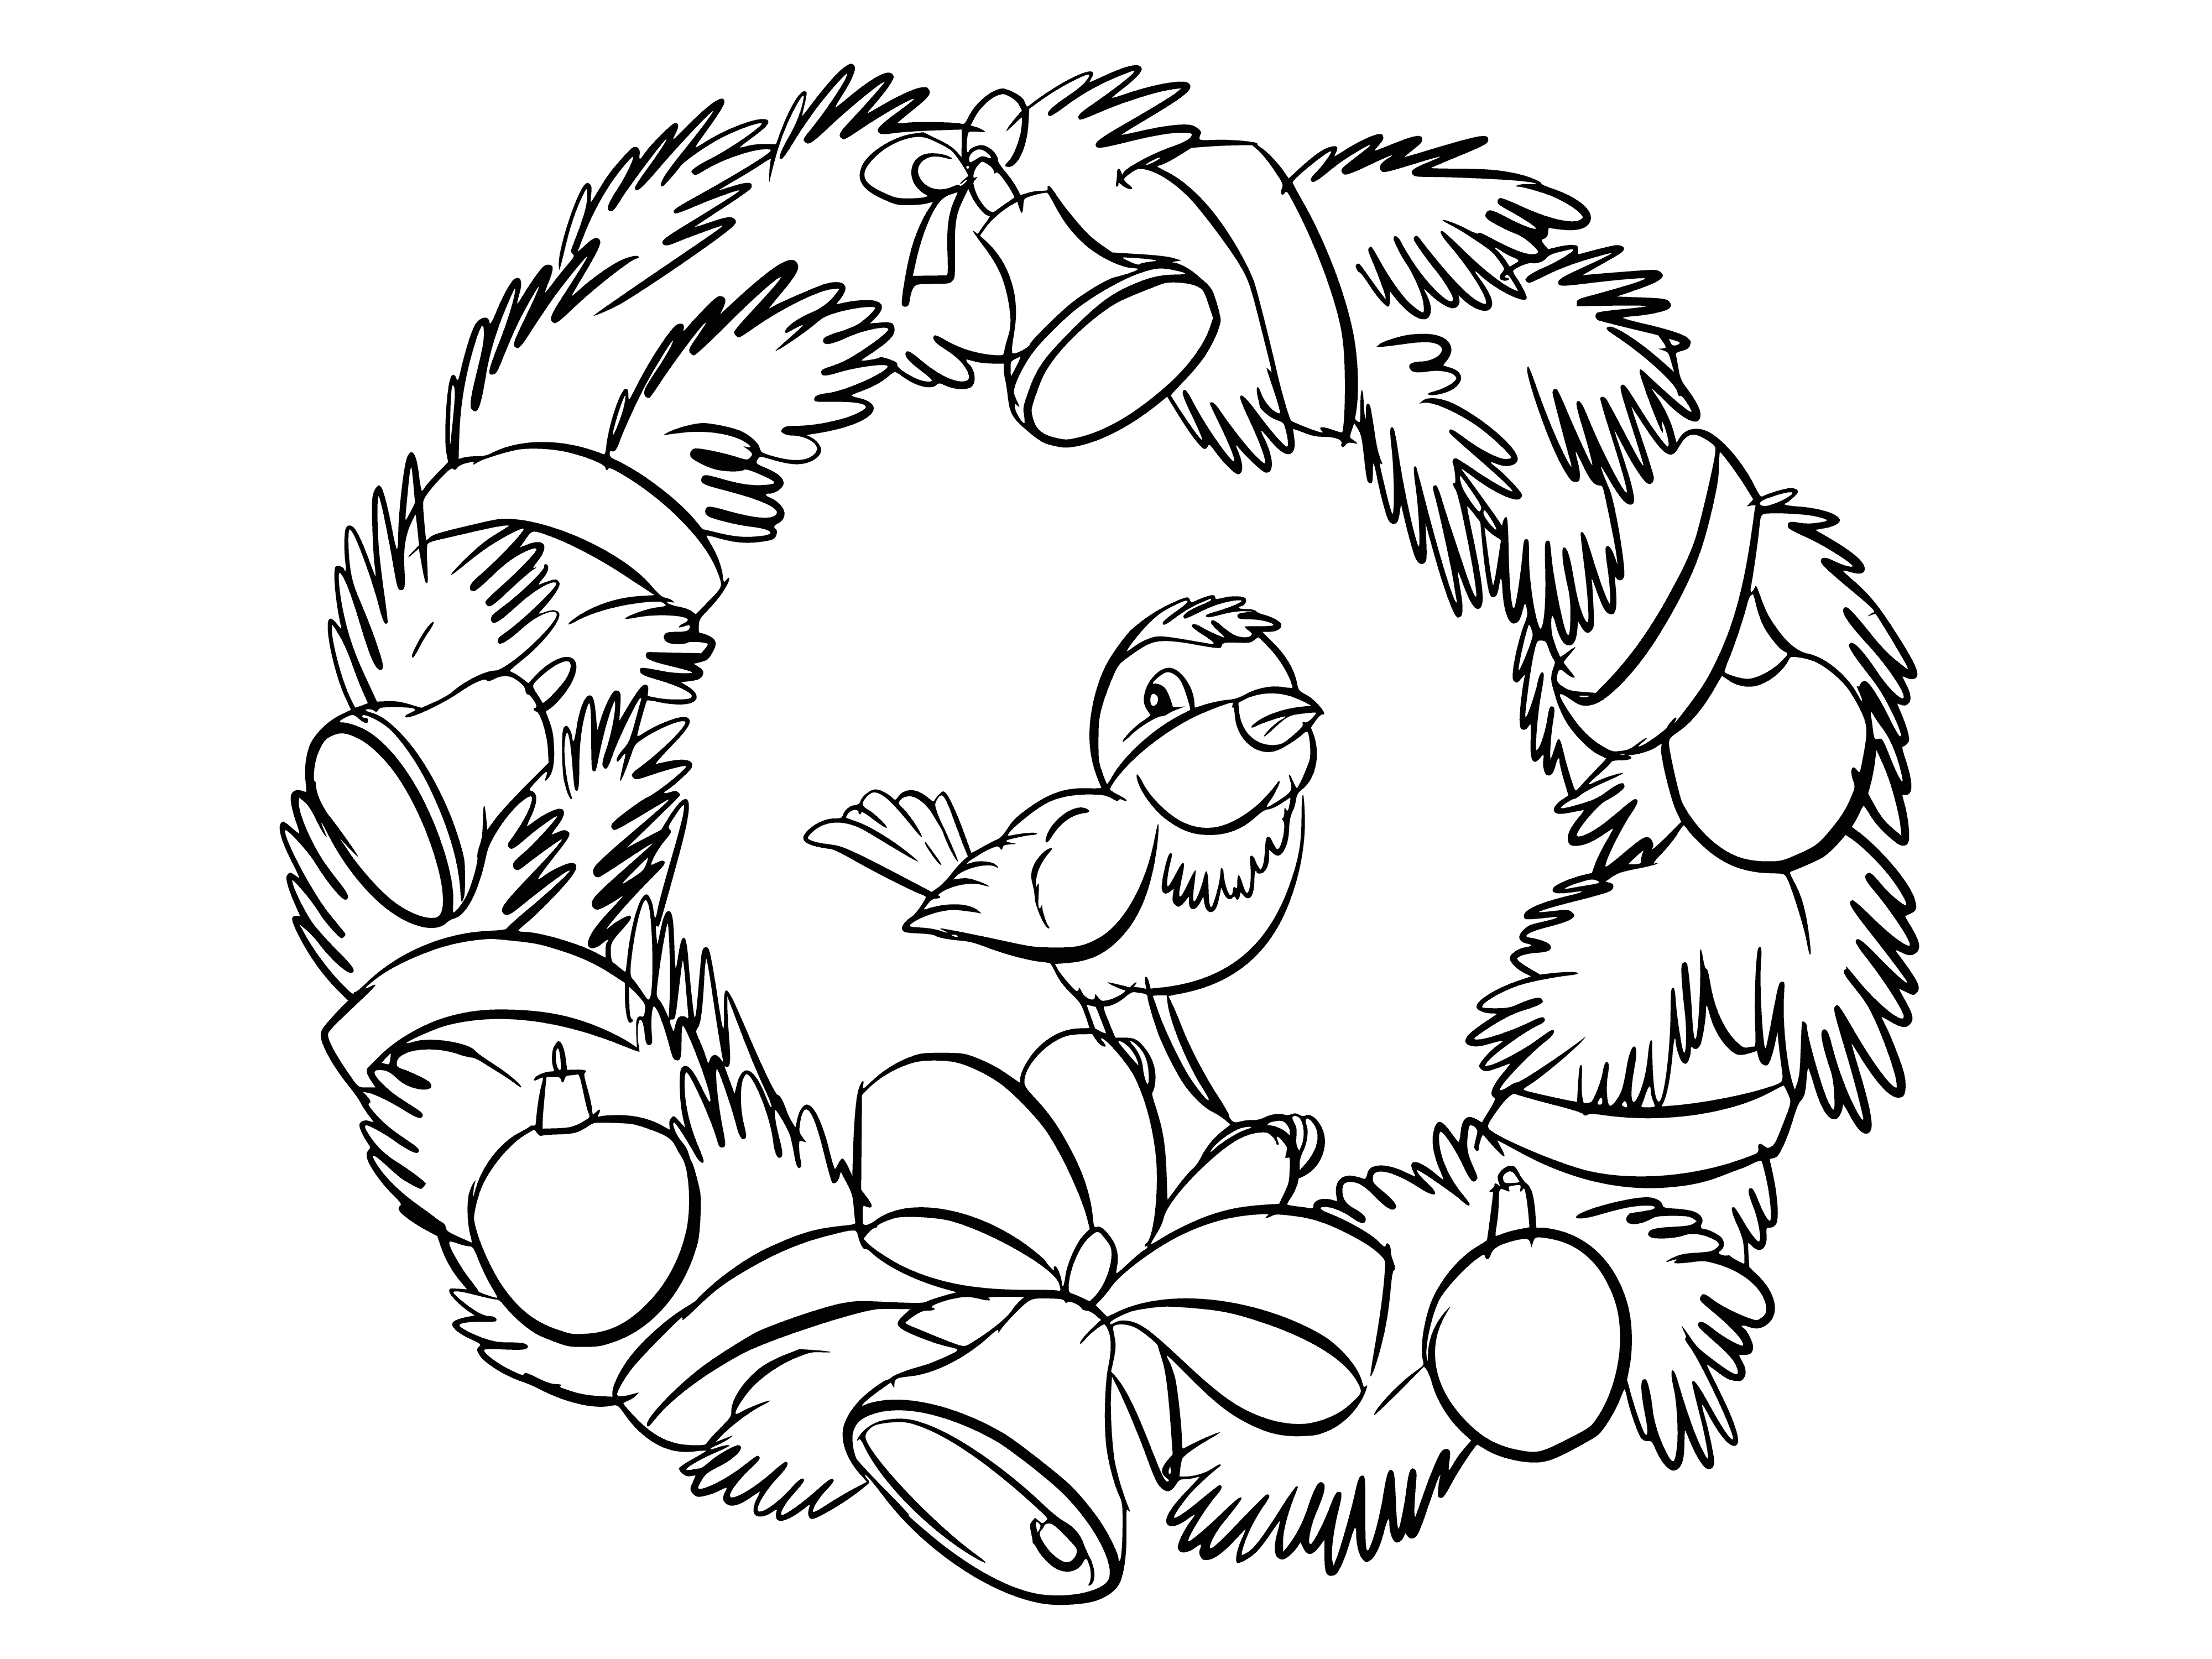 A Christmas wreath: evergreen branches, leaves, ribbons, baubles - hung on a door/window as festive décor.